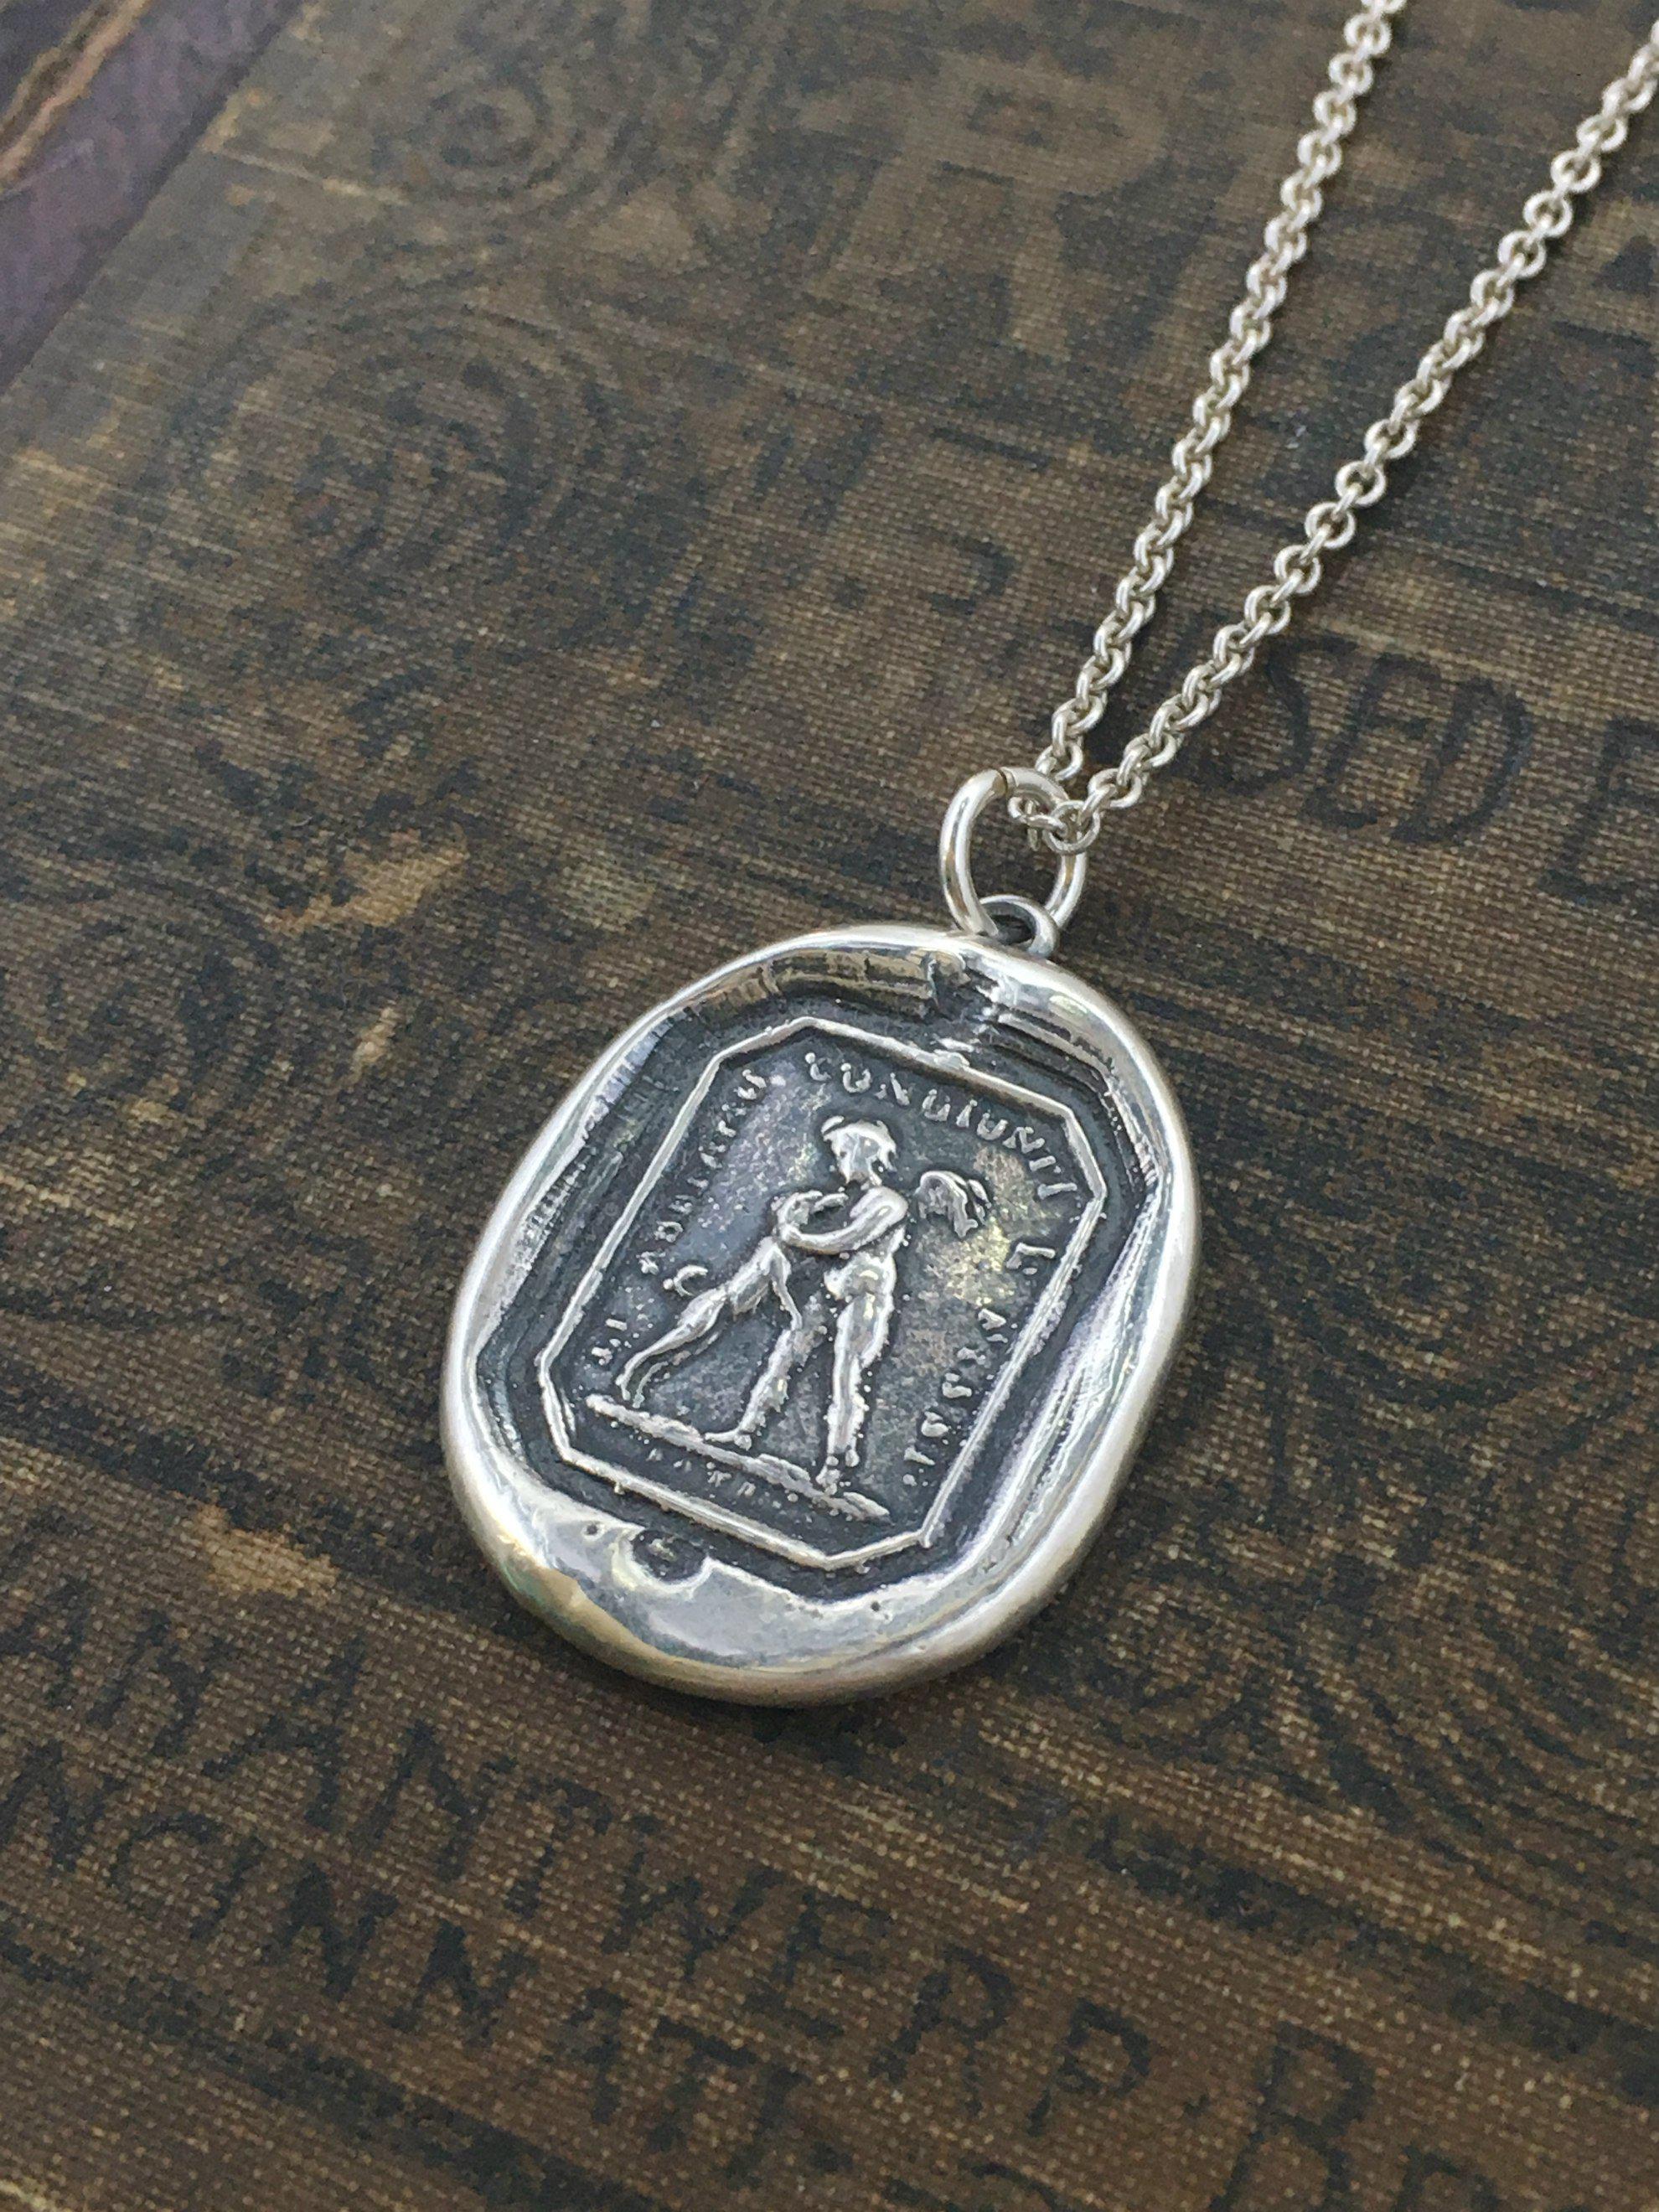 Friendship wax seal necklace with a silver necklace